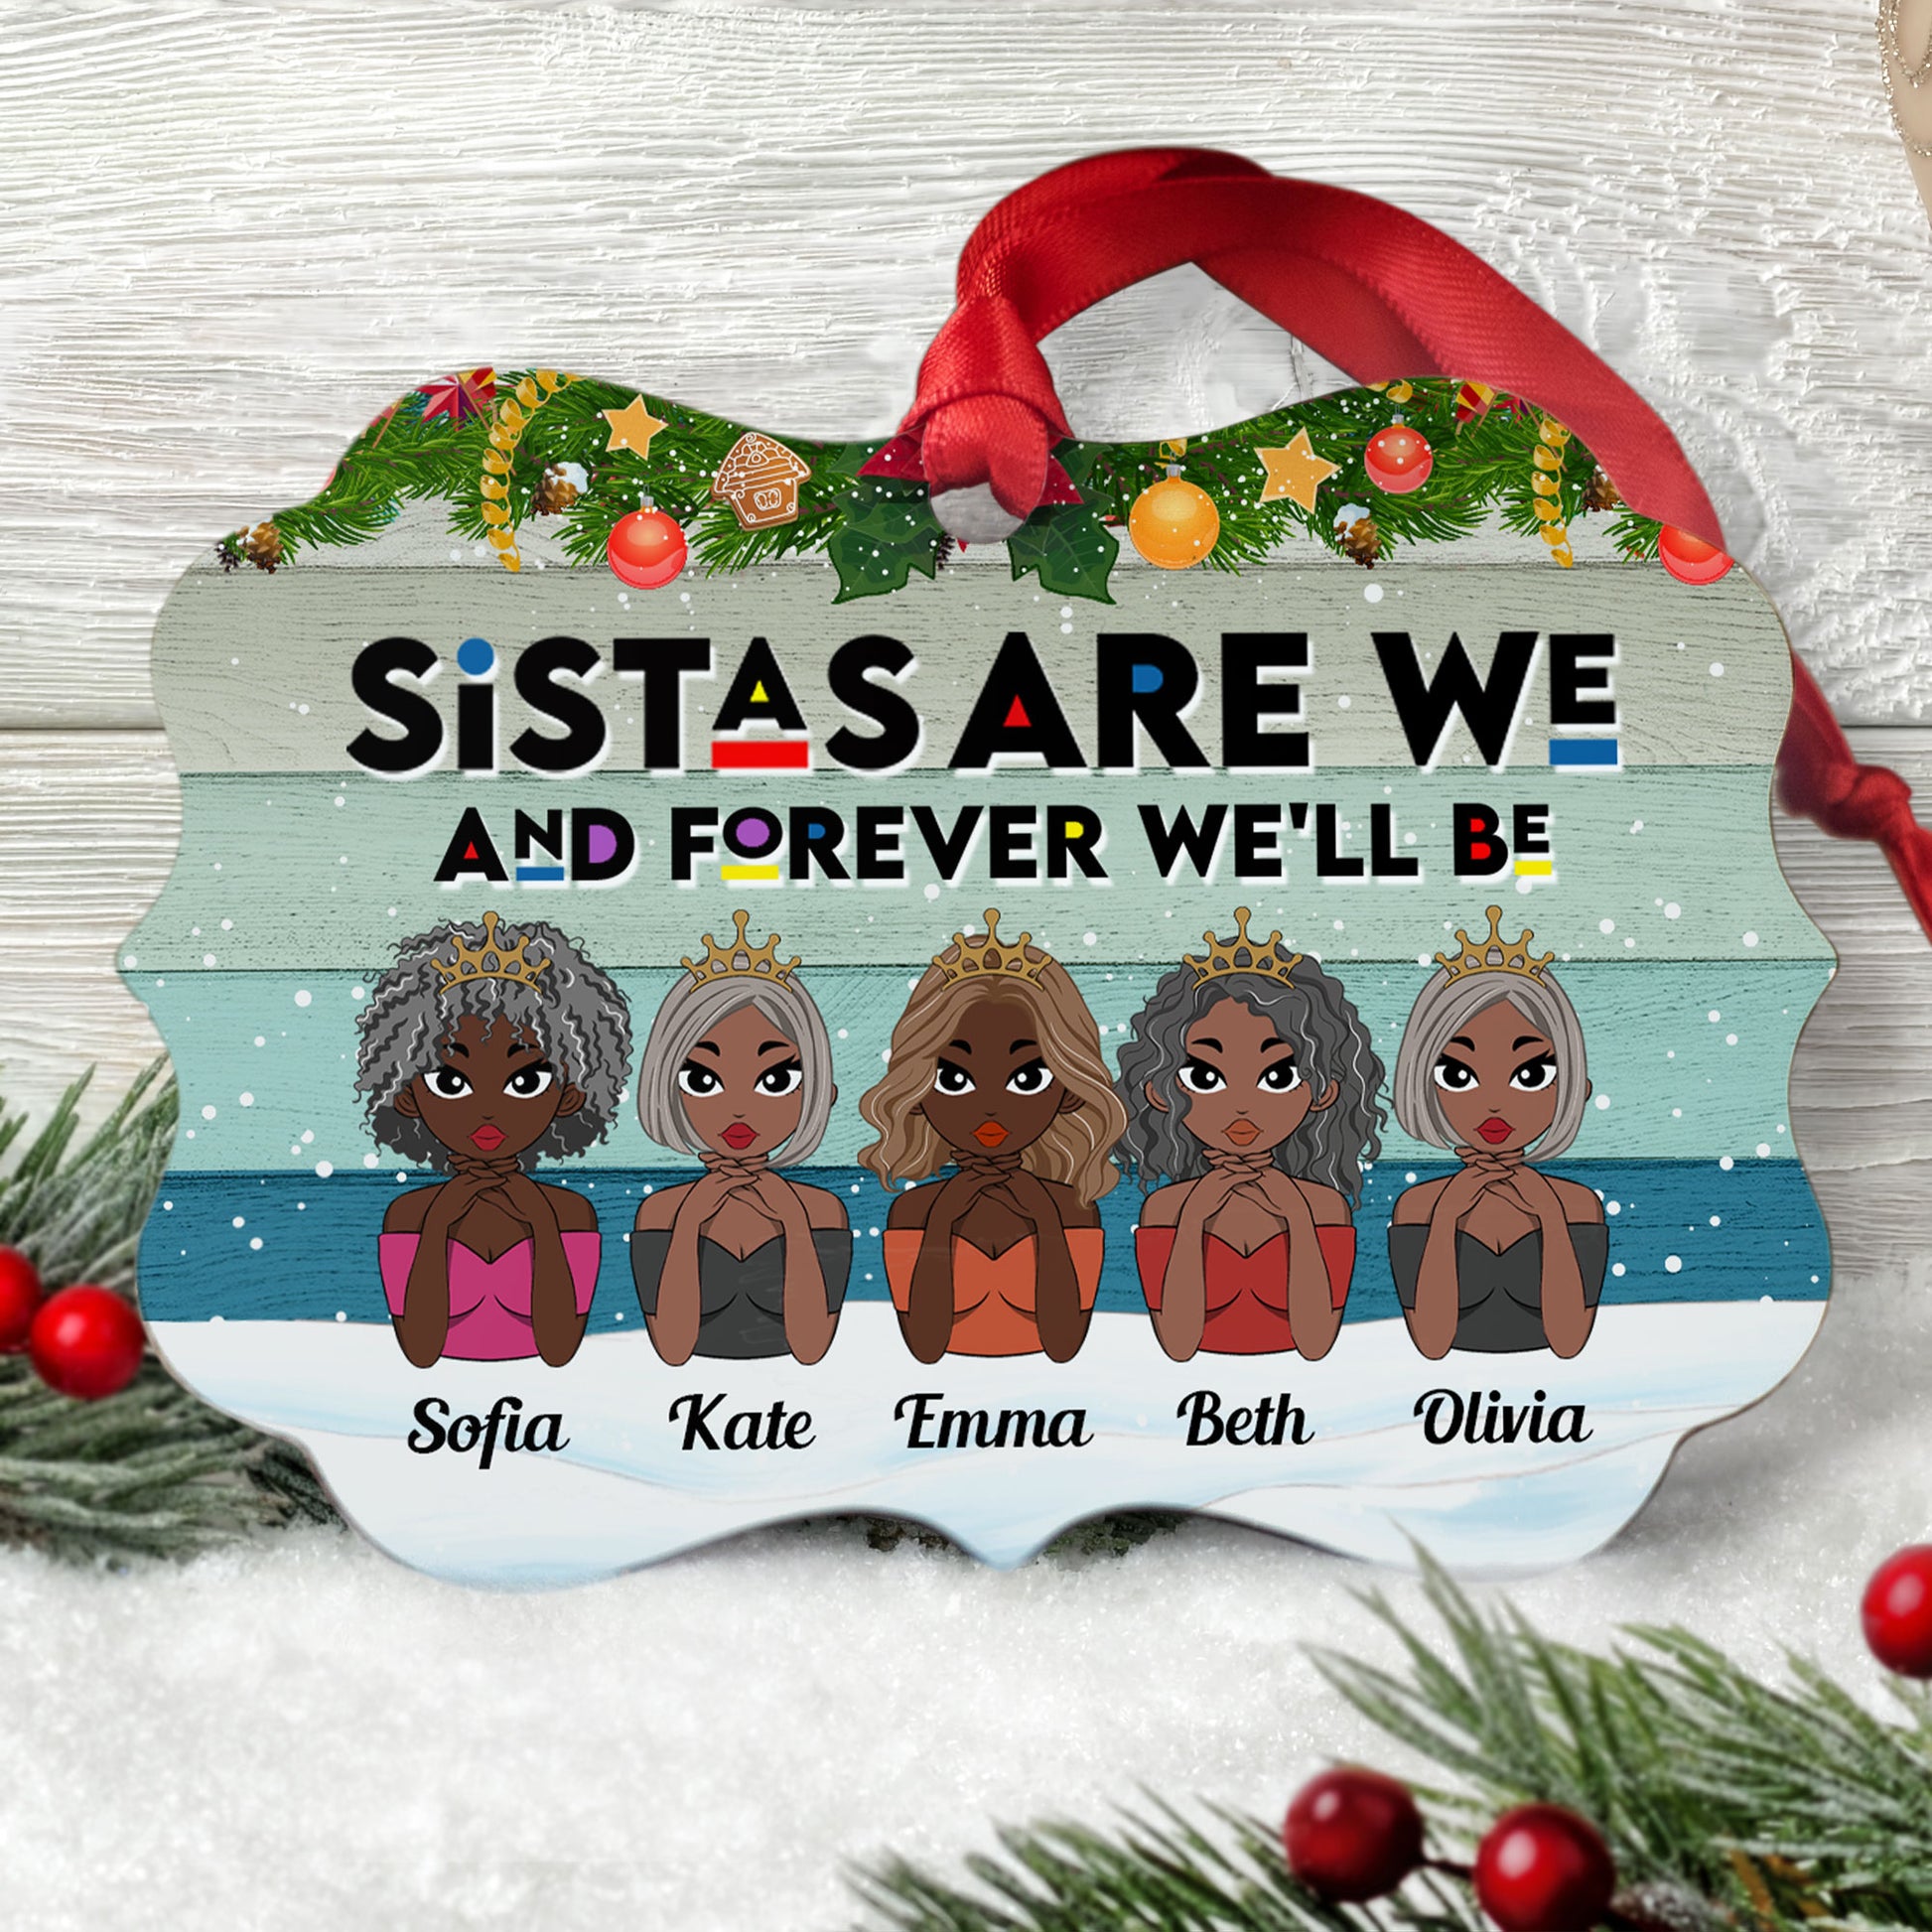 The Love Between Sistas Is Forever - Personalized Aluminum Ornament - Christmas Gift For Sistas, Sisters